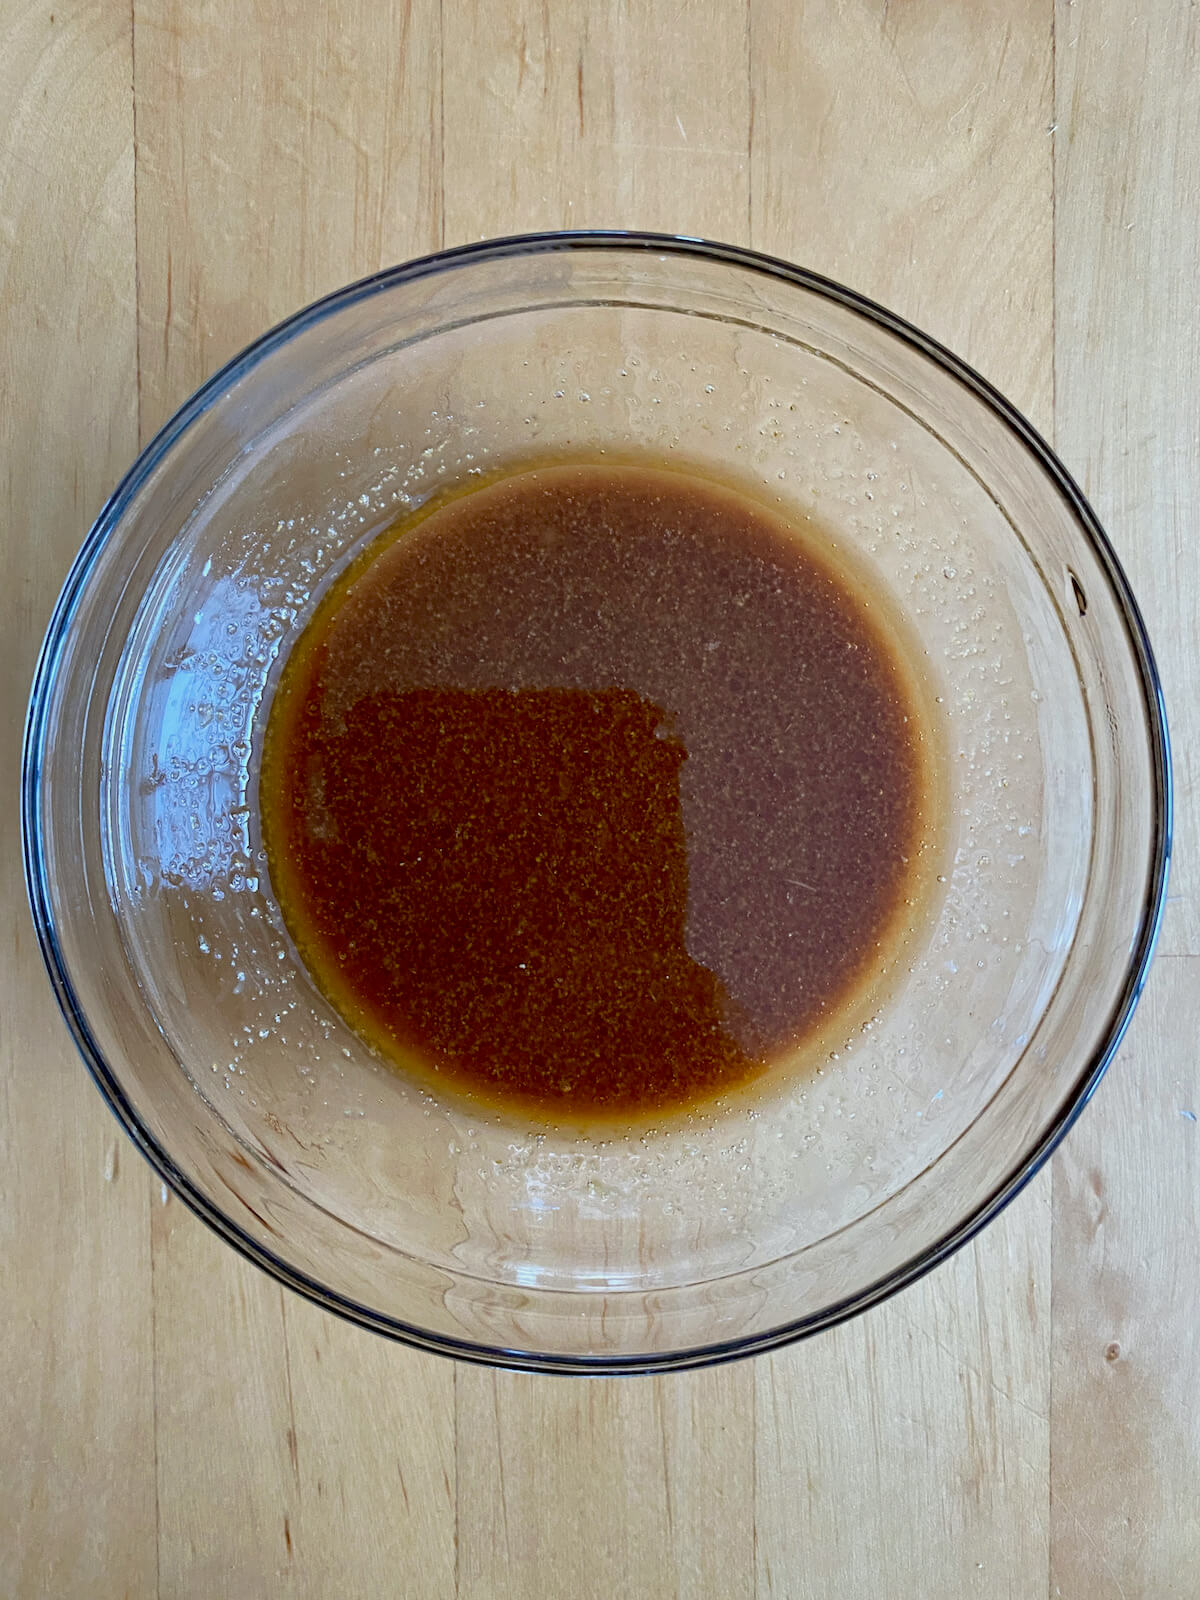 A mixture of cornstarch, soy sauce, sesame oil, and garlic power in a small glass bowl.